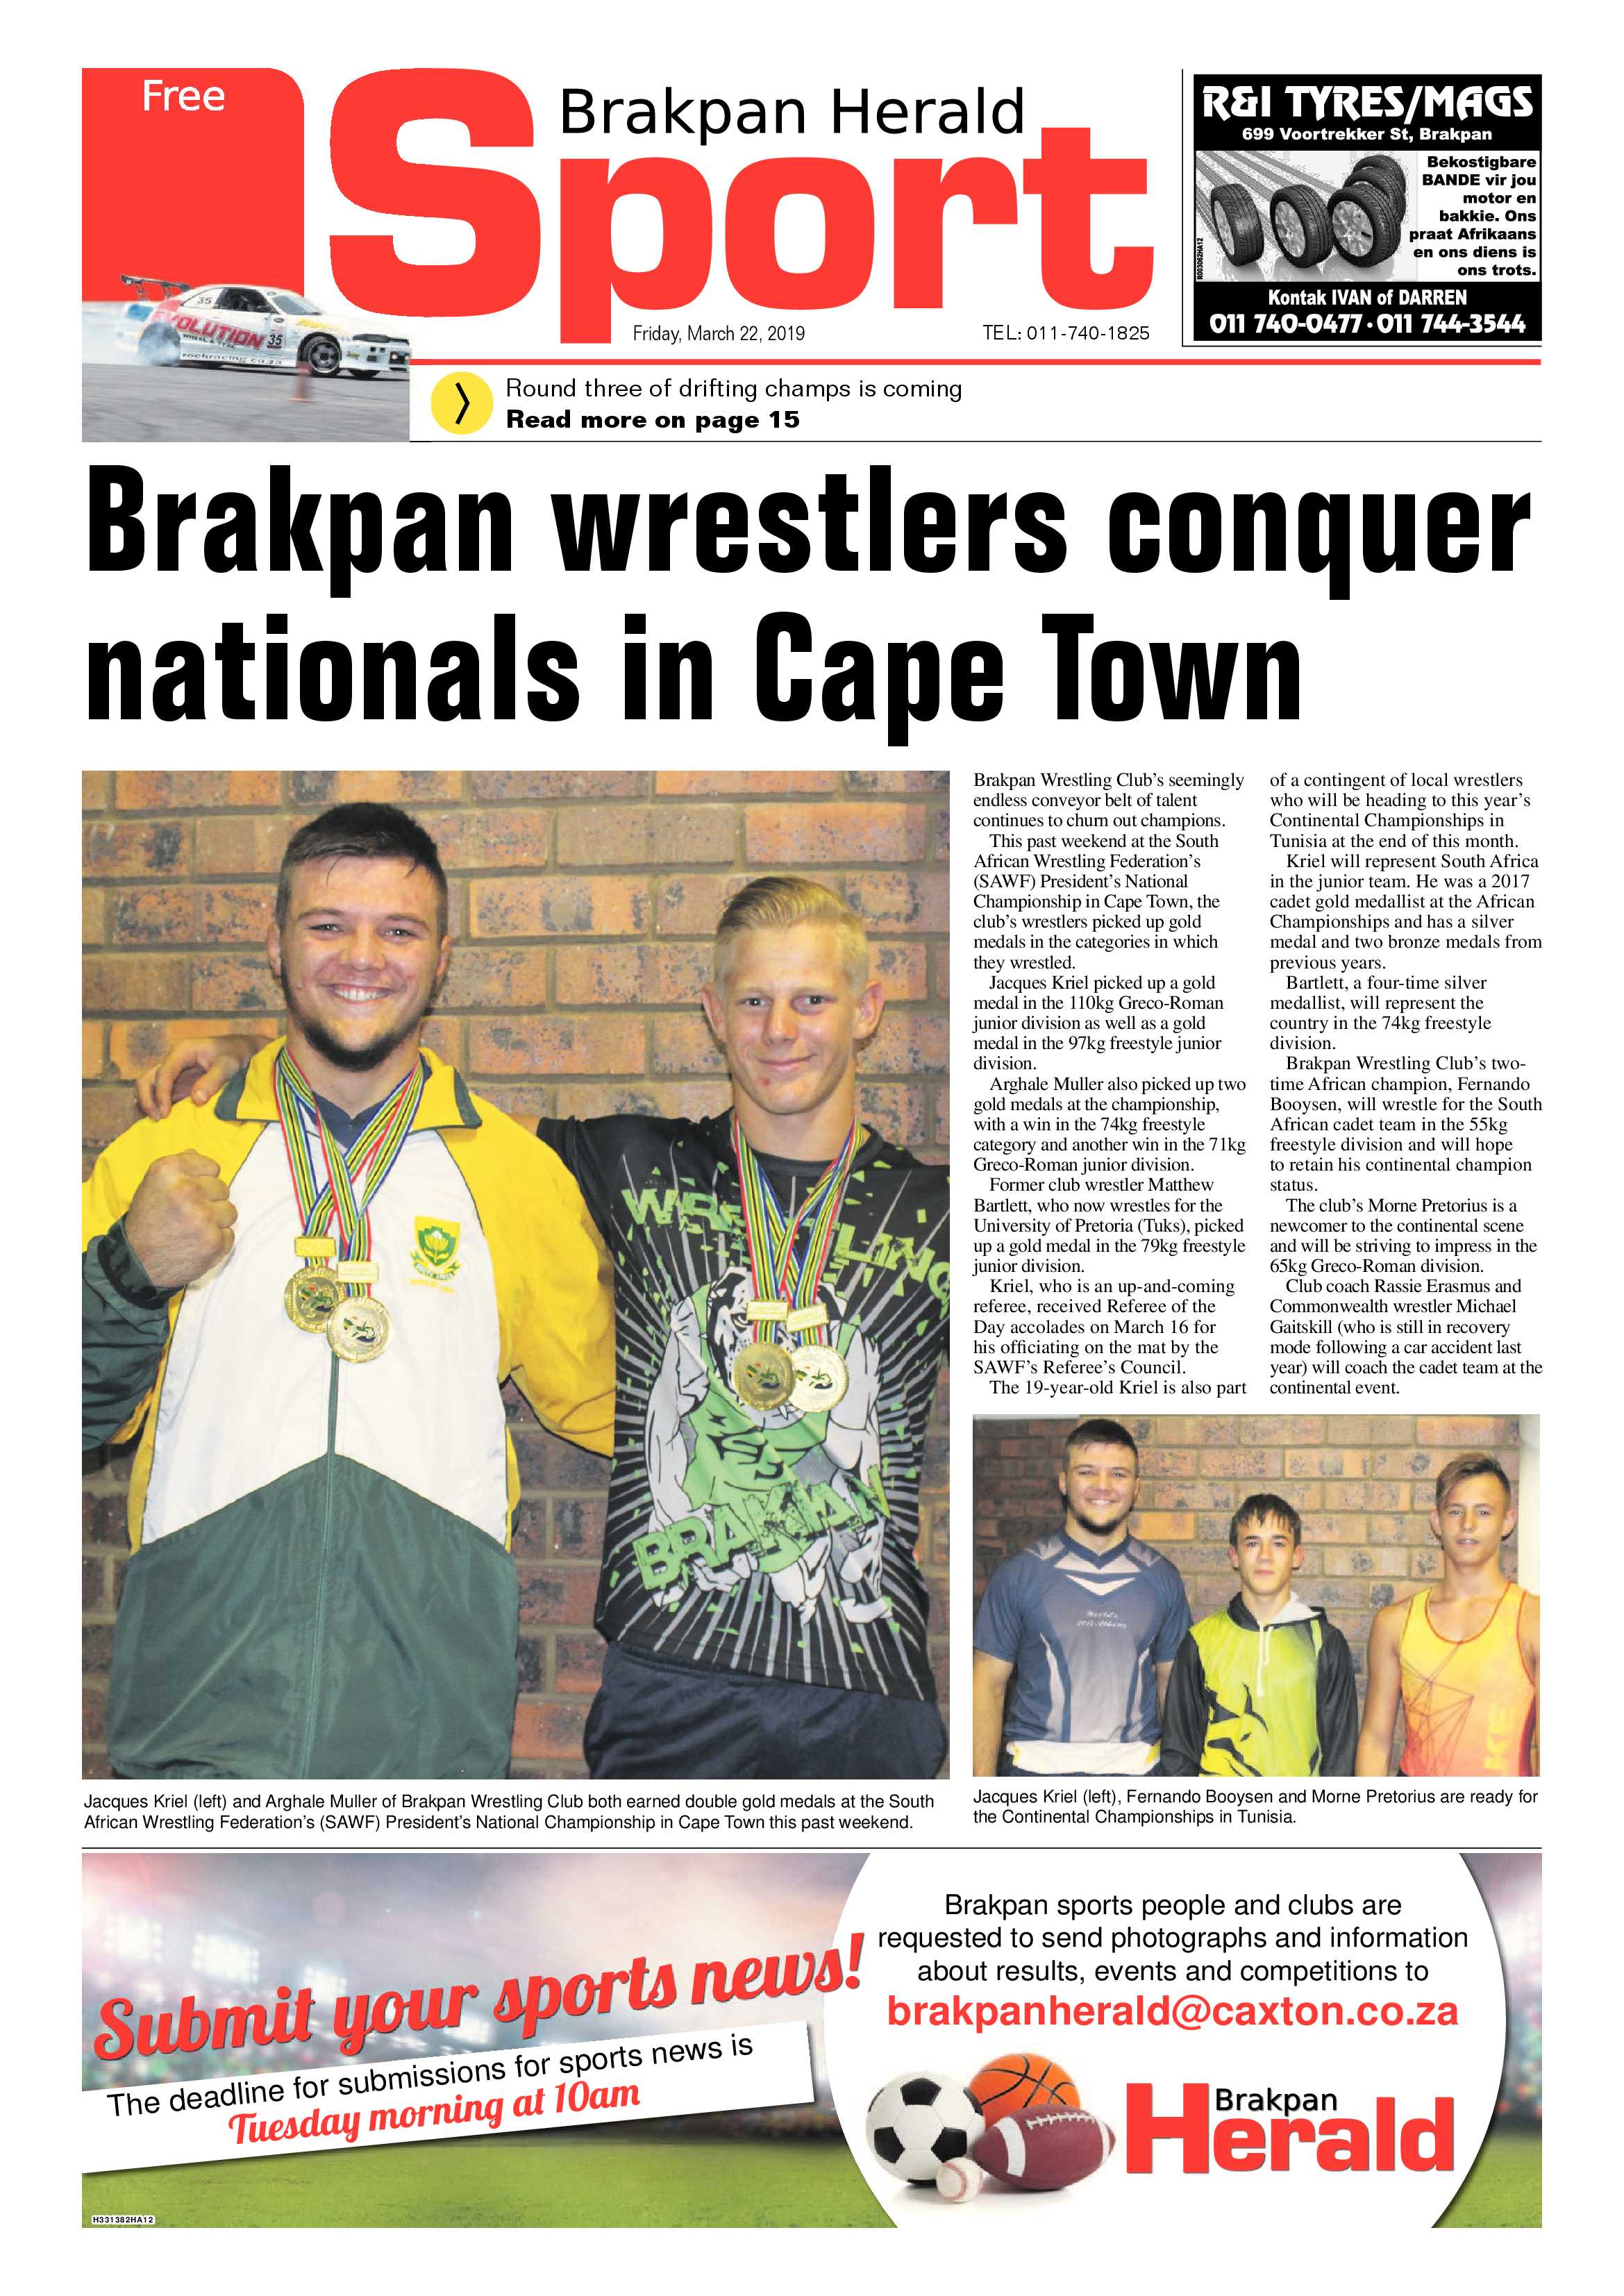 Brakpan Herald 22 March 2019 page 16